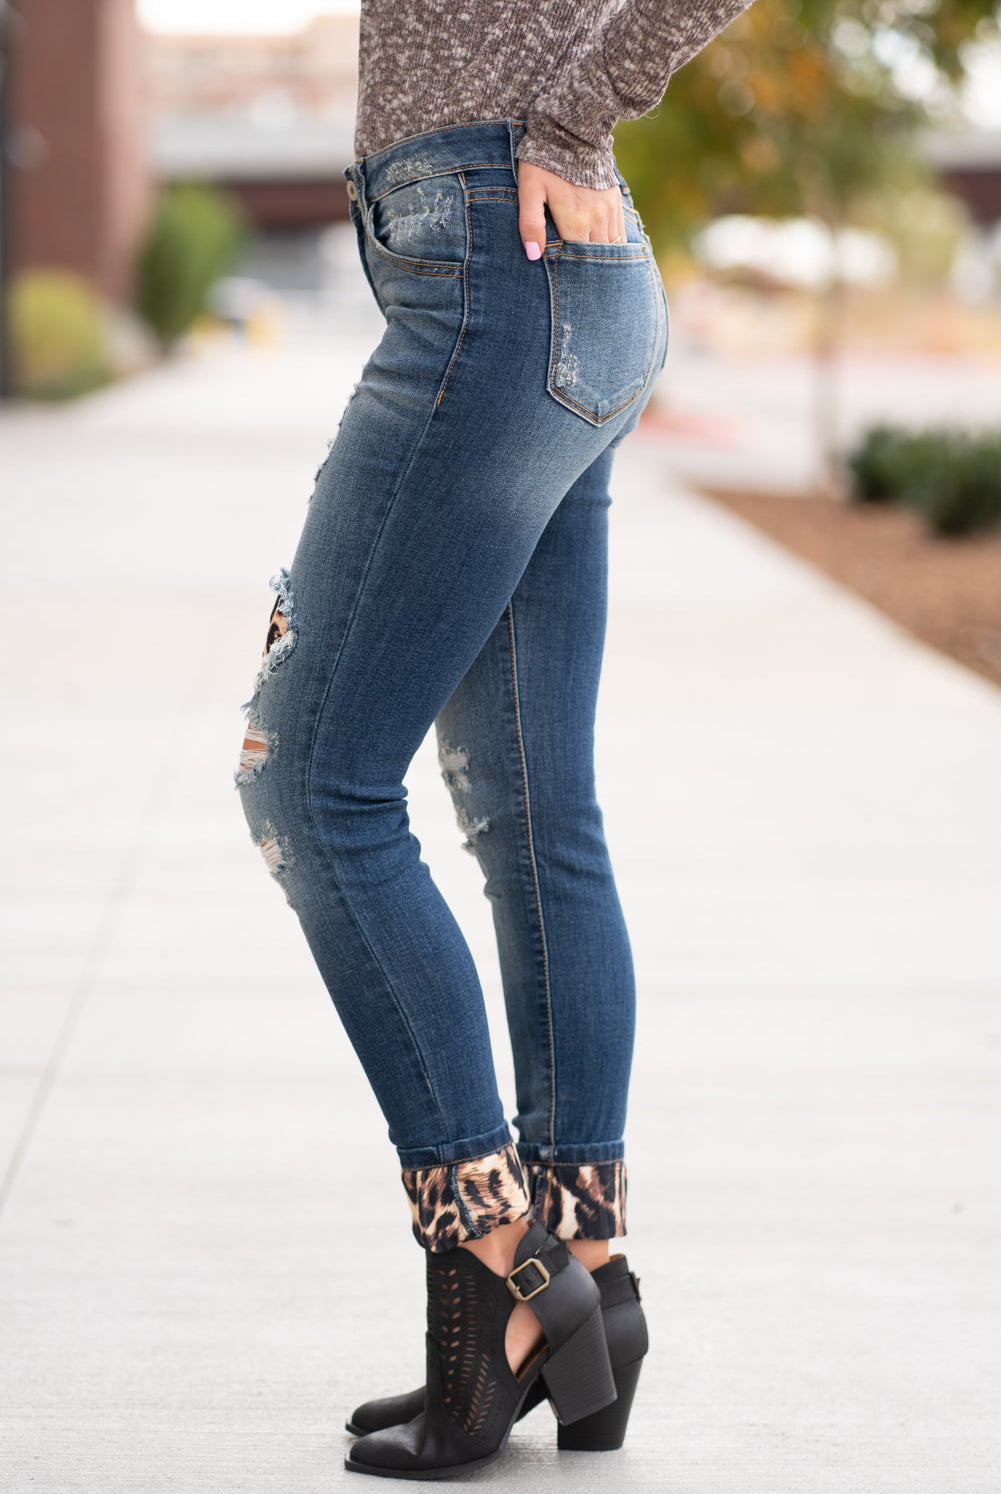 KanCan Jeans  Collection: Core Style Style Name: Mason Leopard Patch Skinny Color: Medium Dark Wash Cut: Skinny, 29.5" Inseam Rise: Mid-Rise, 8.5" Front Rise 70% COTTON 19% POLYESTER 10% RAYON 1% LYCRA Fly: Zipper  Style #: KC8191D Contact us for any additional measurements or sizing.  Melissa is 5'5" and wears a 2 in jeans, small top and size 6 shoe. She is wearing a 24/1 in these jeans.